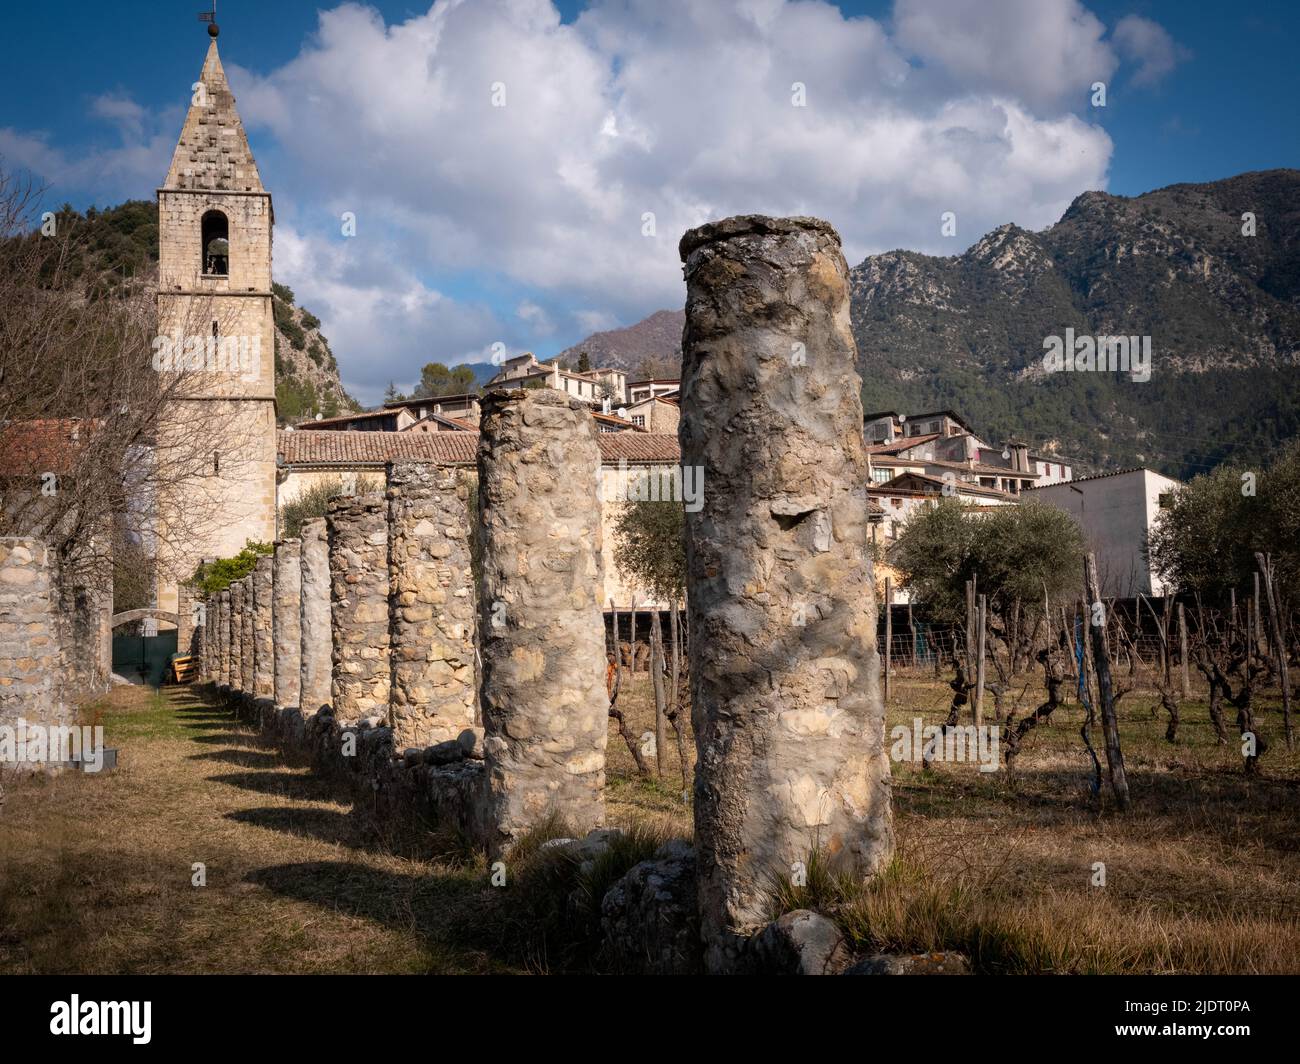 View of 30 historic columns coming from the village church with bell tower of Villars-sur-Var in the Alps-Maritimes province of southeastern France. Stock Photo